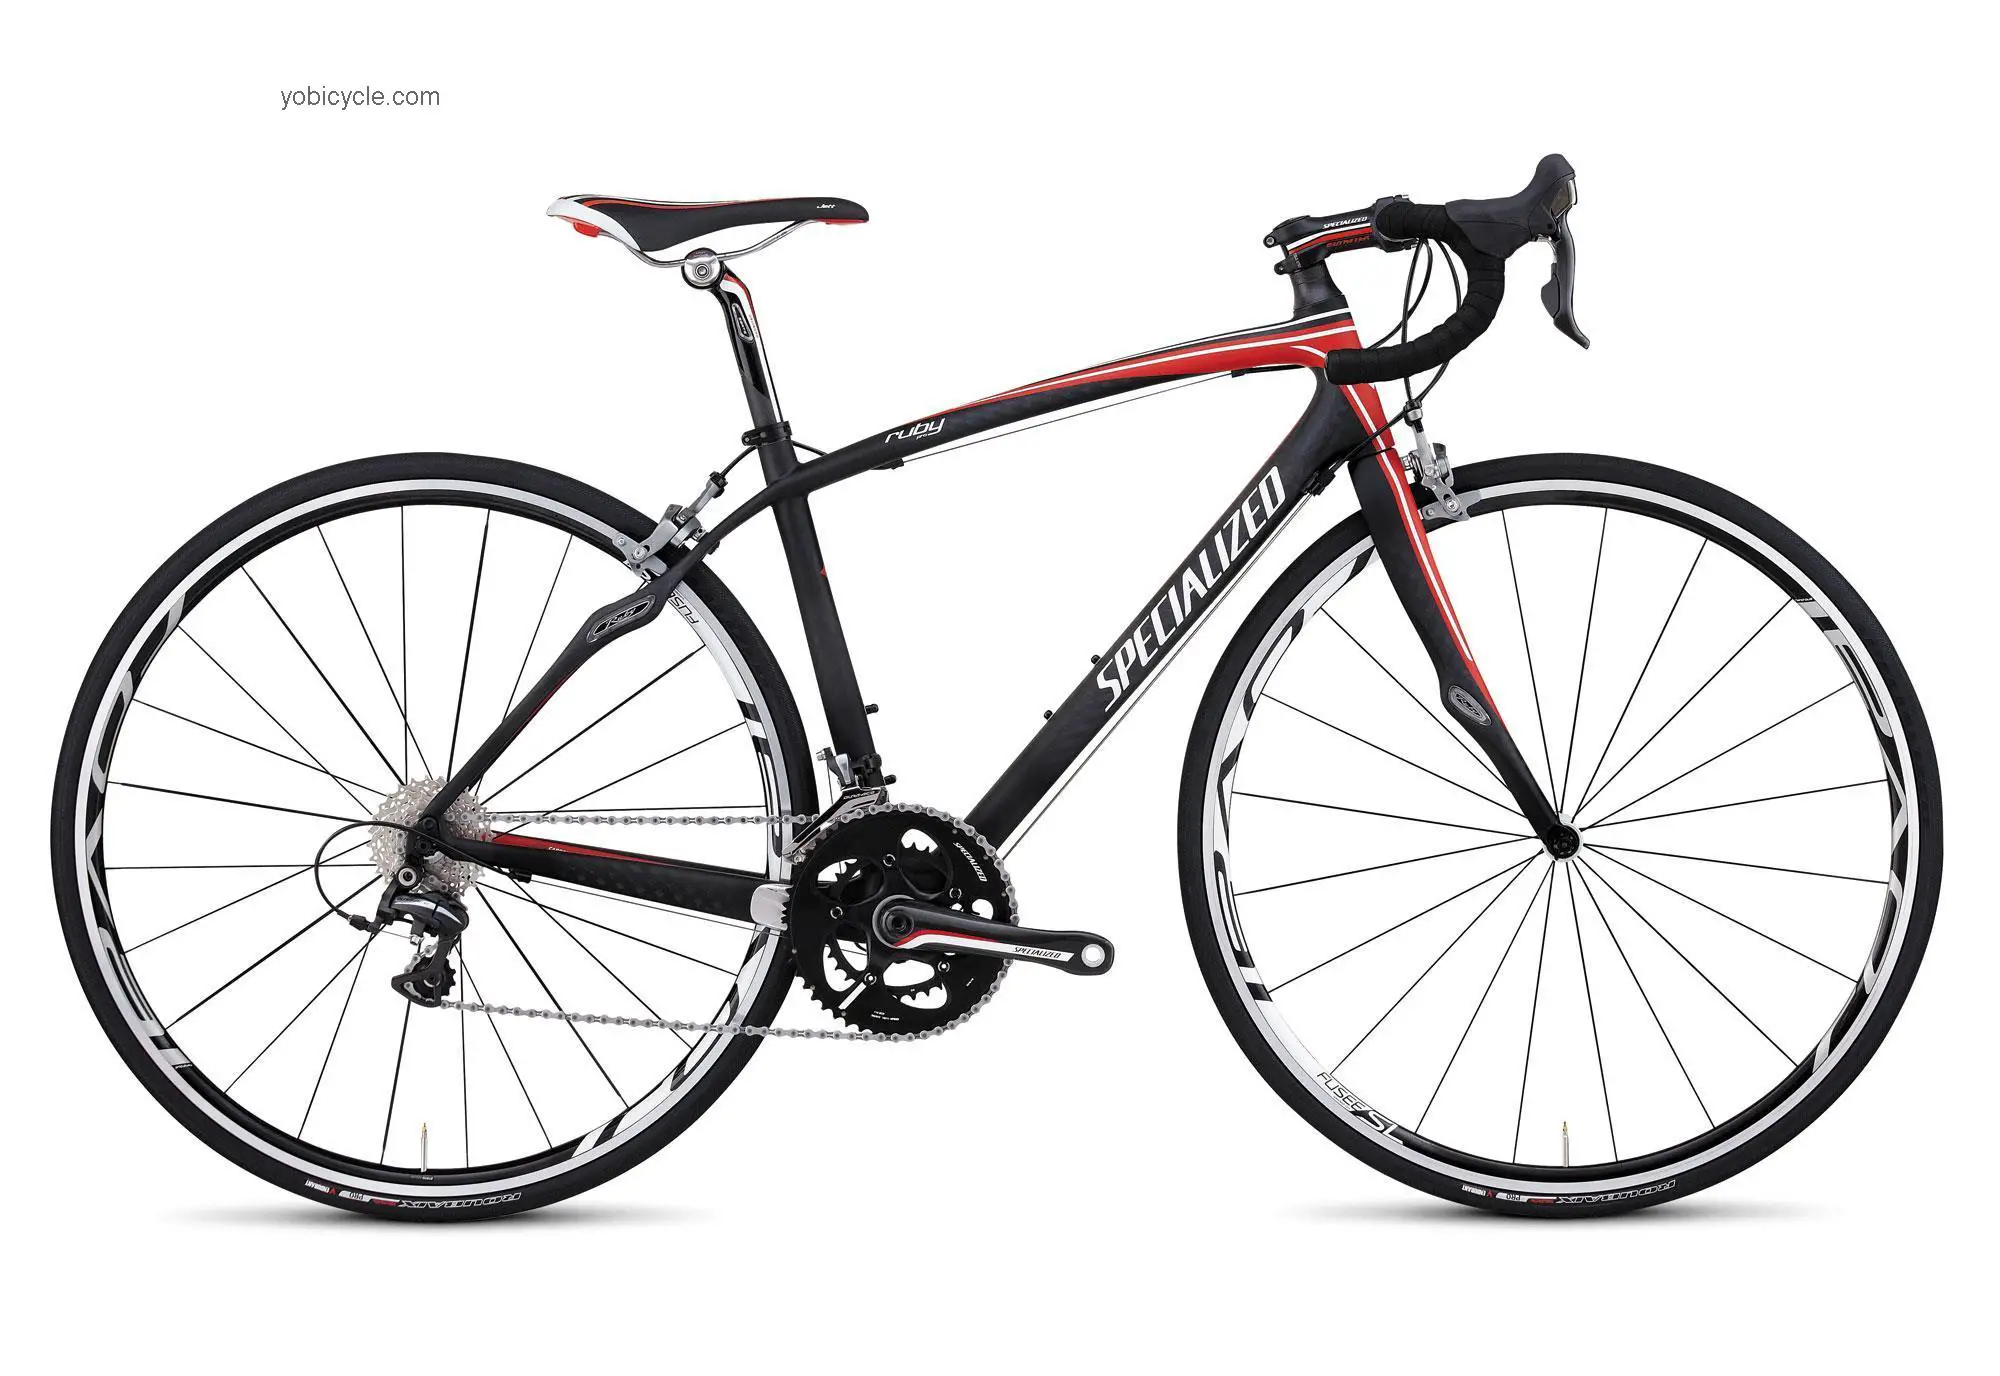 Specialized Ruby Pro Compact 2012 comparison online with competitors